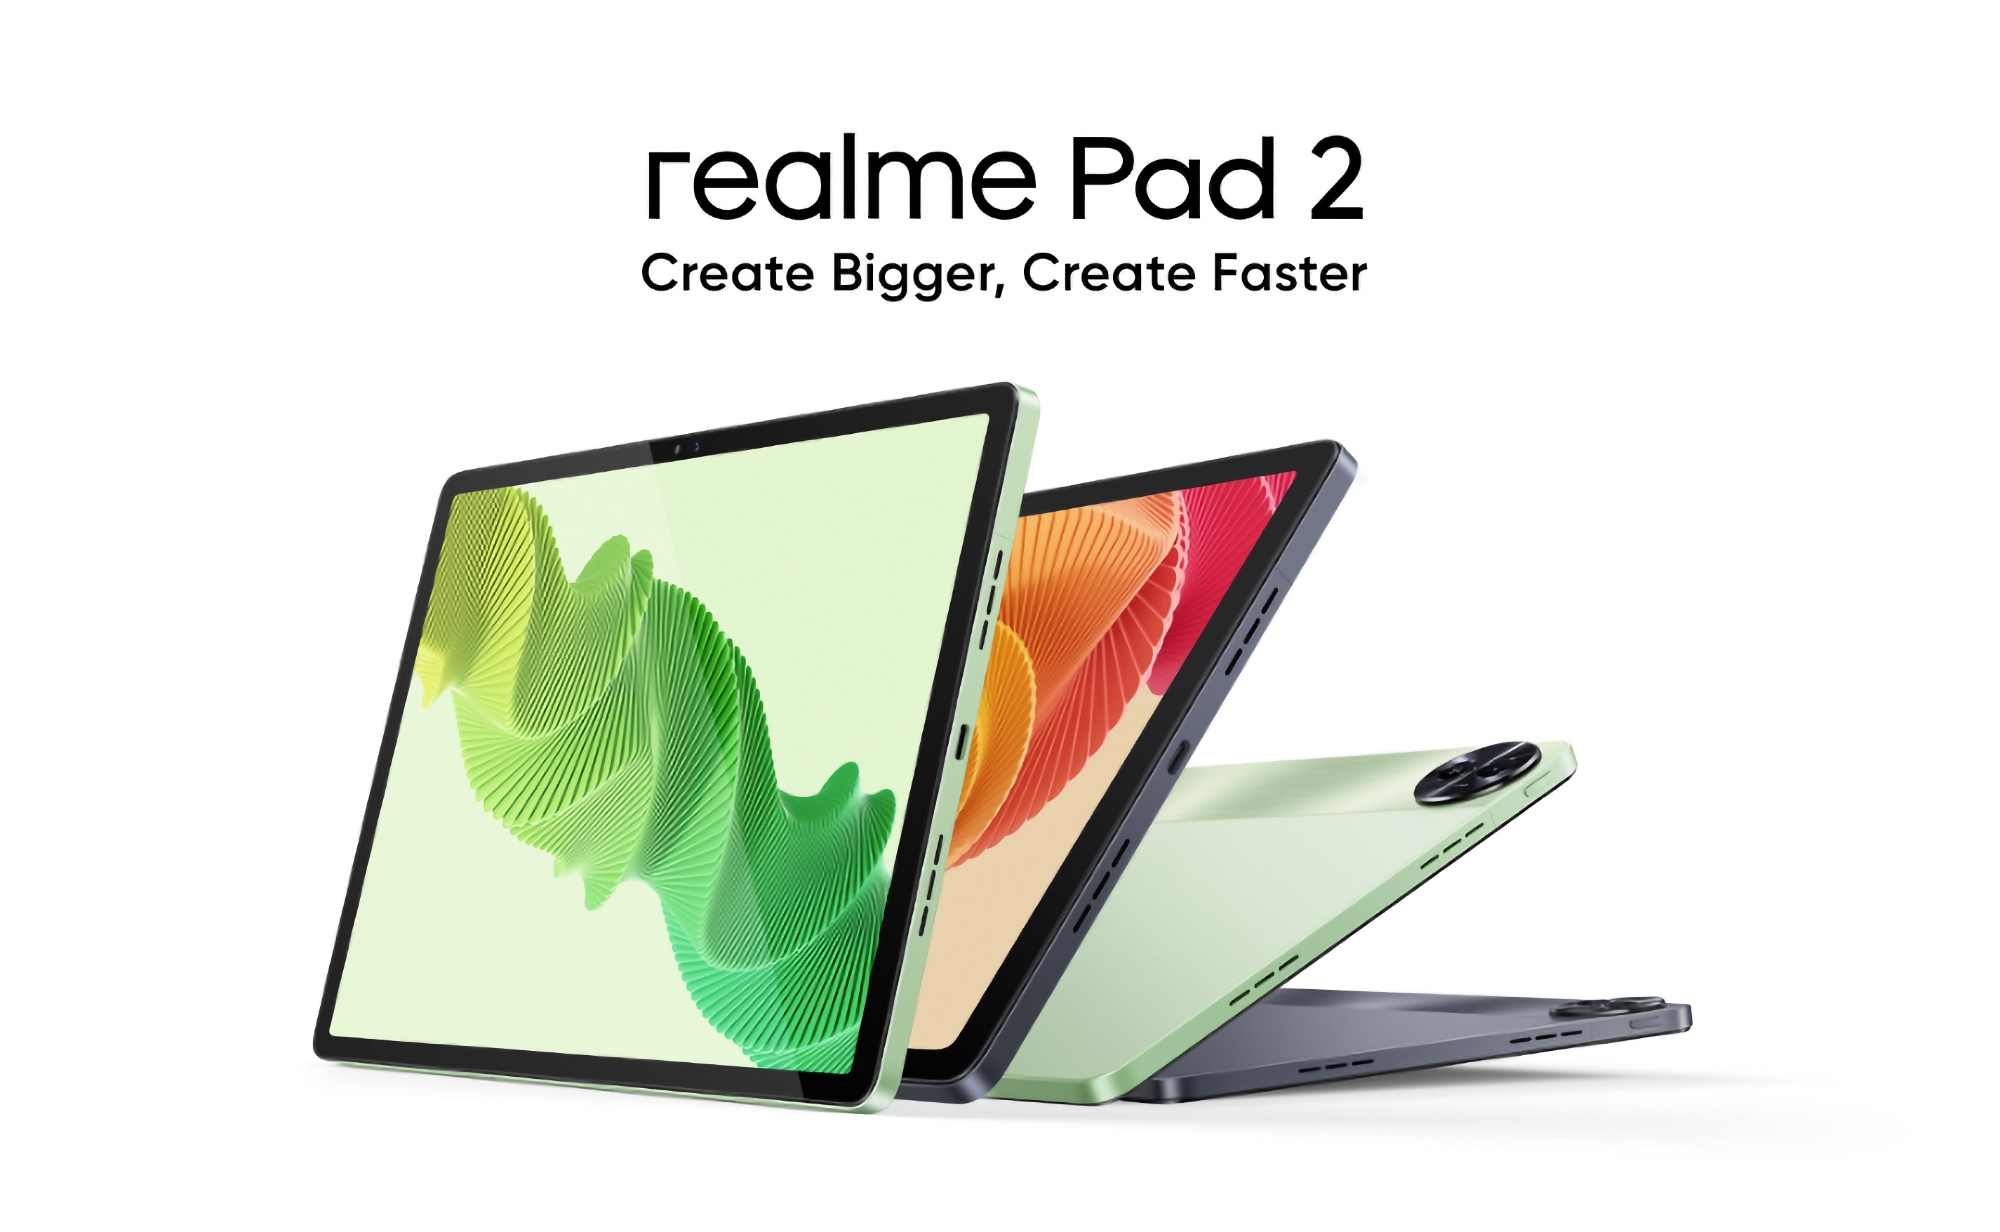 Realme has unveiled a new version of Pad 2 with MediaTek Helio G99 chip and a price of $192